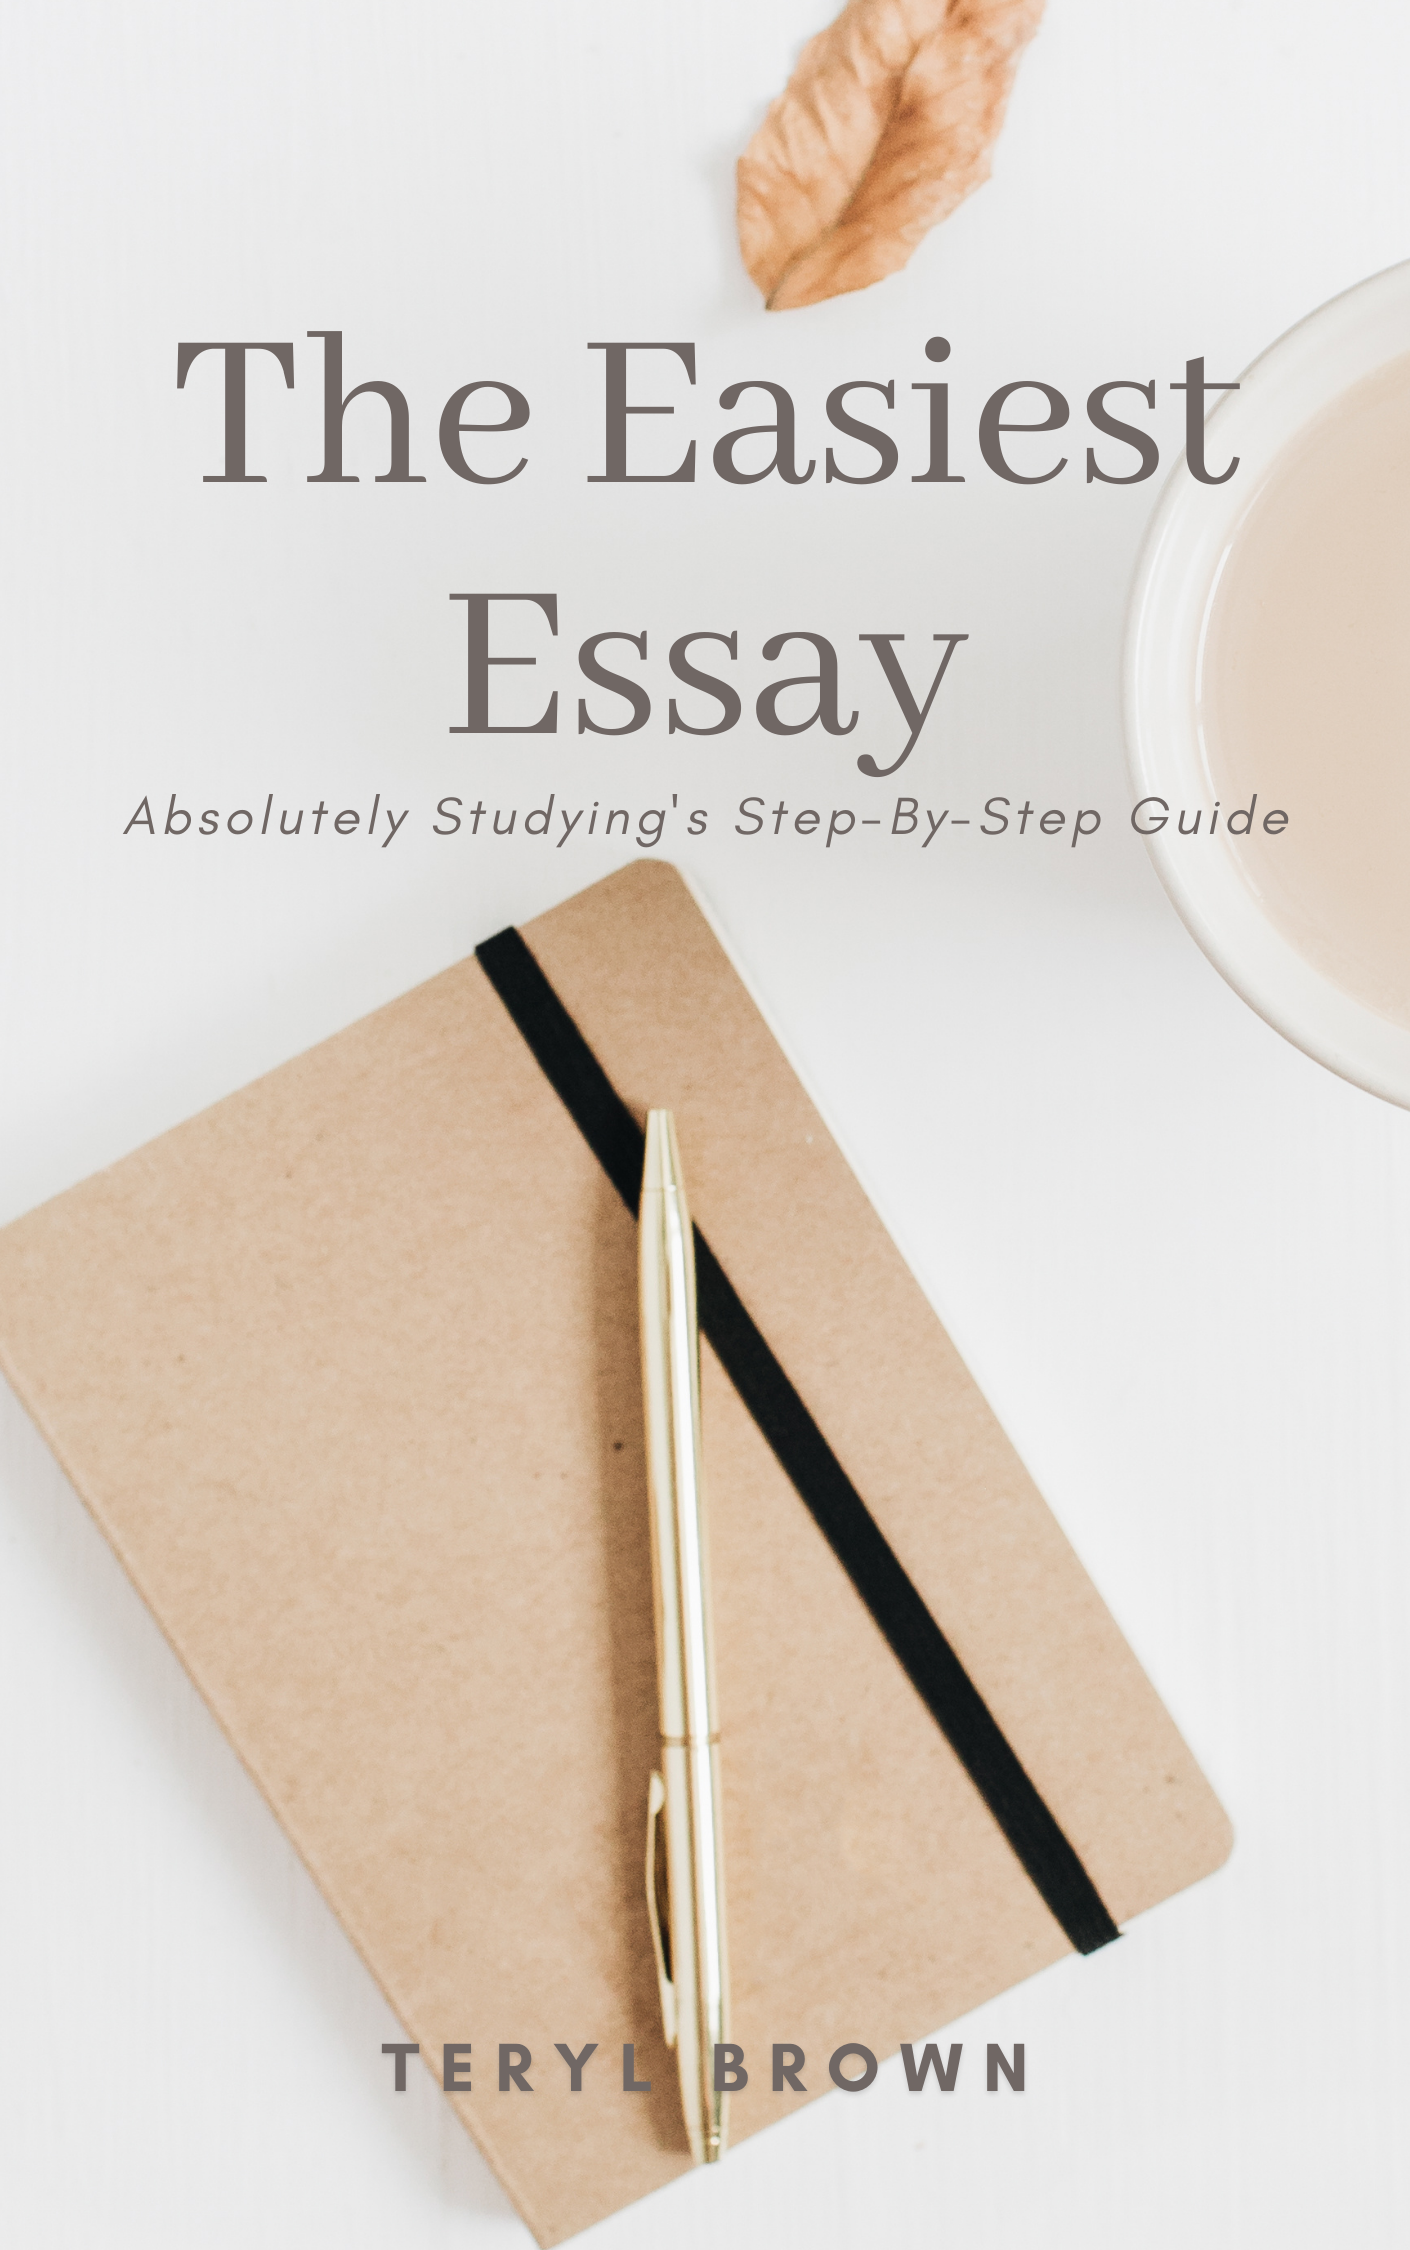 The Easiest Essay - Book Cover.png